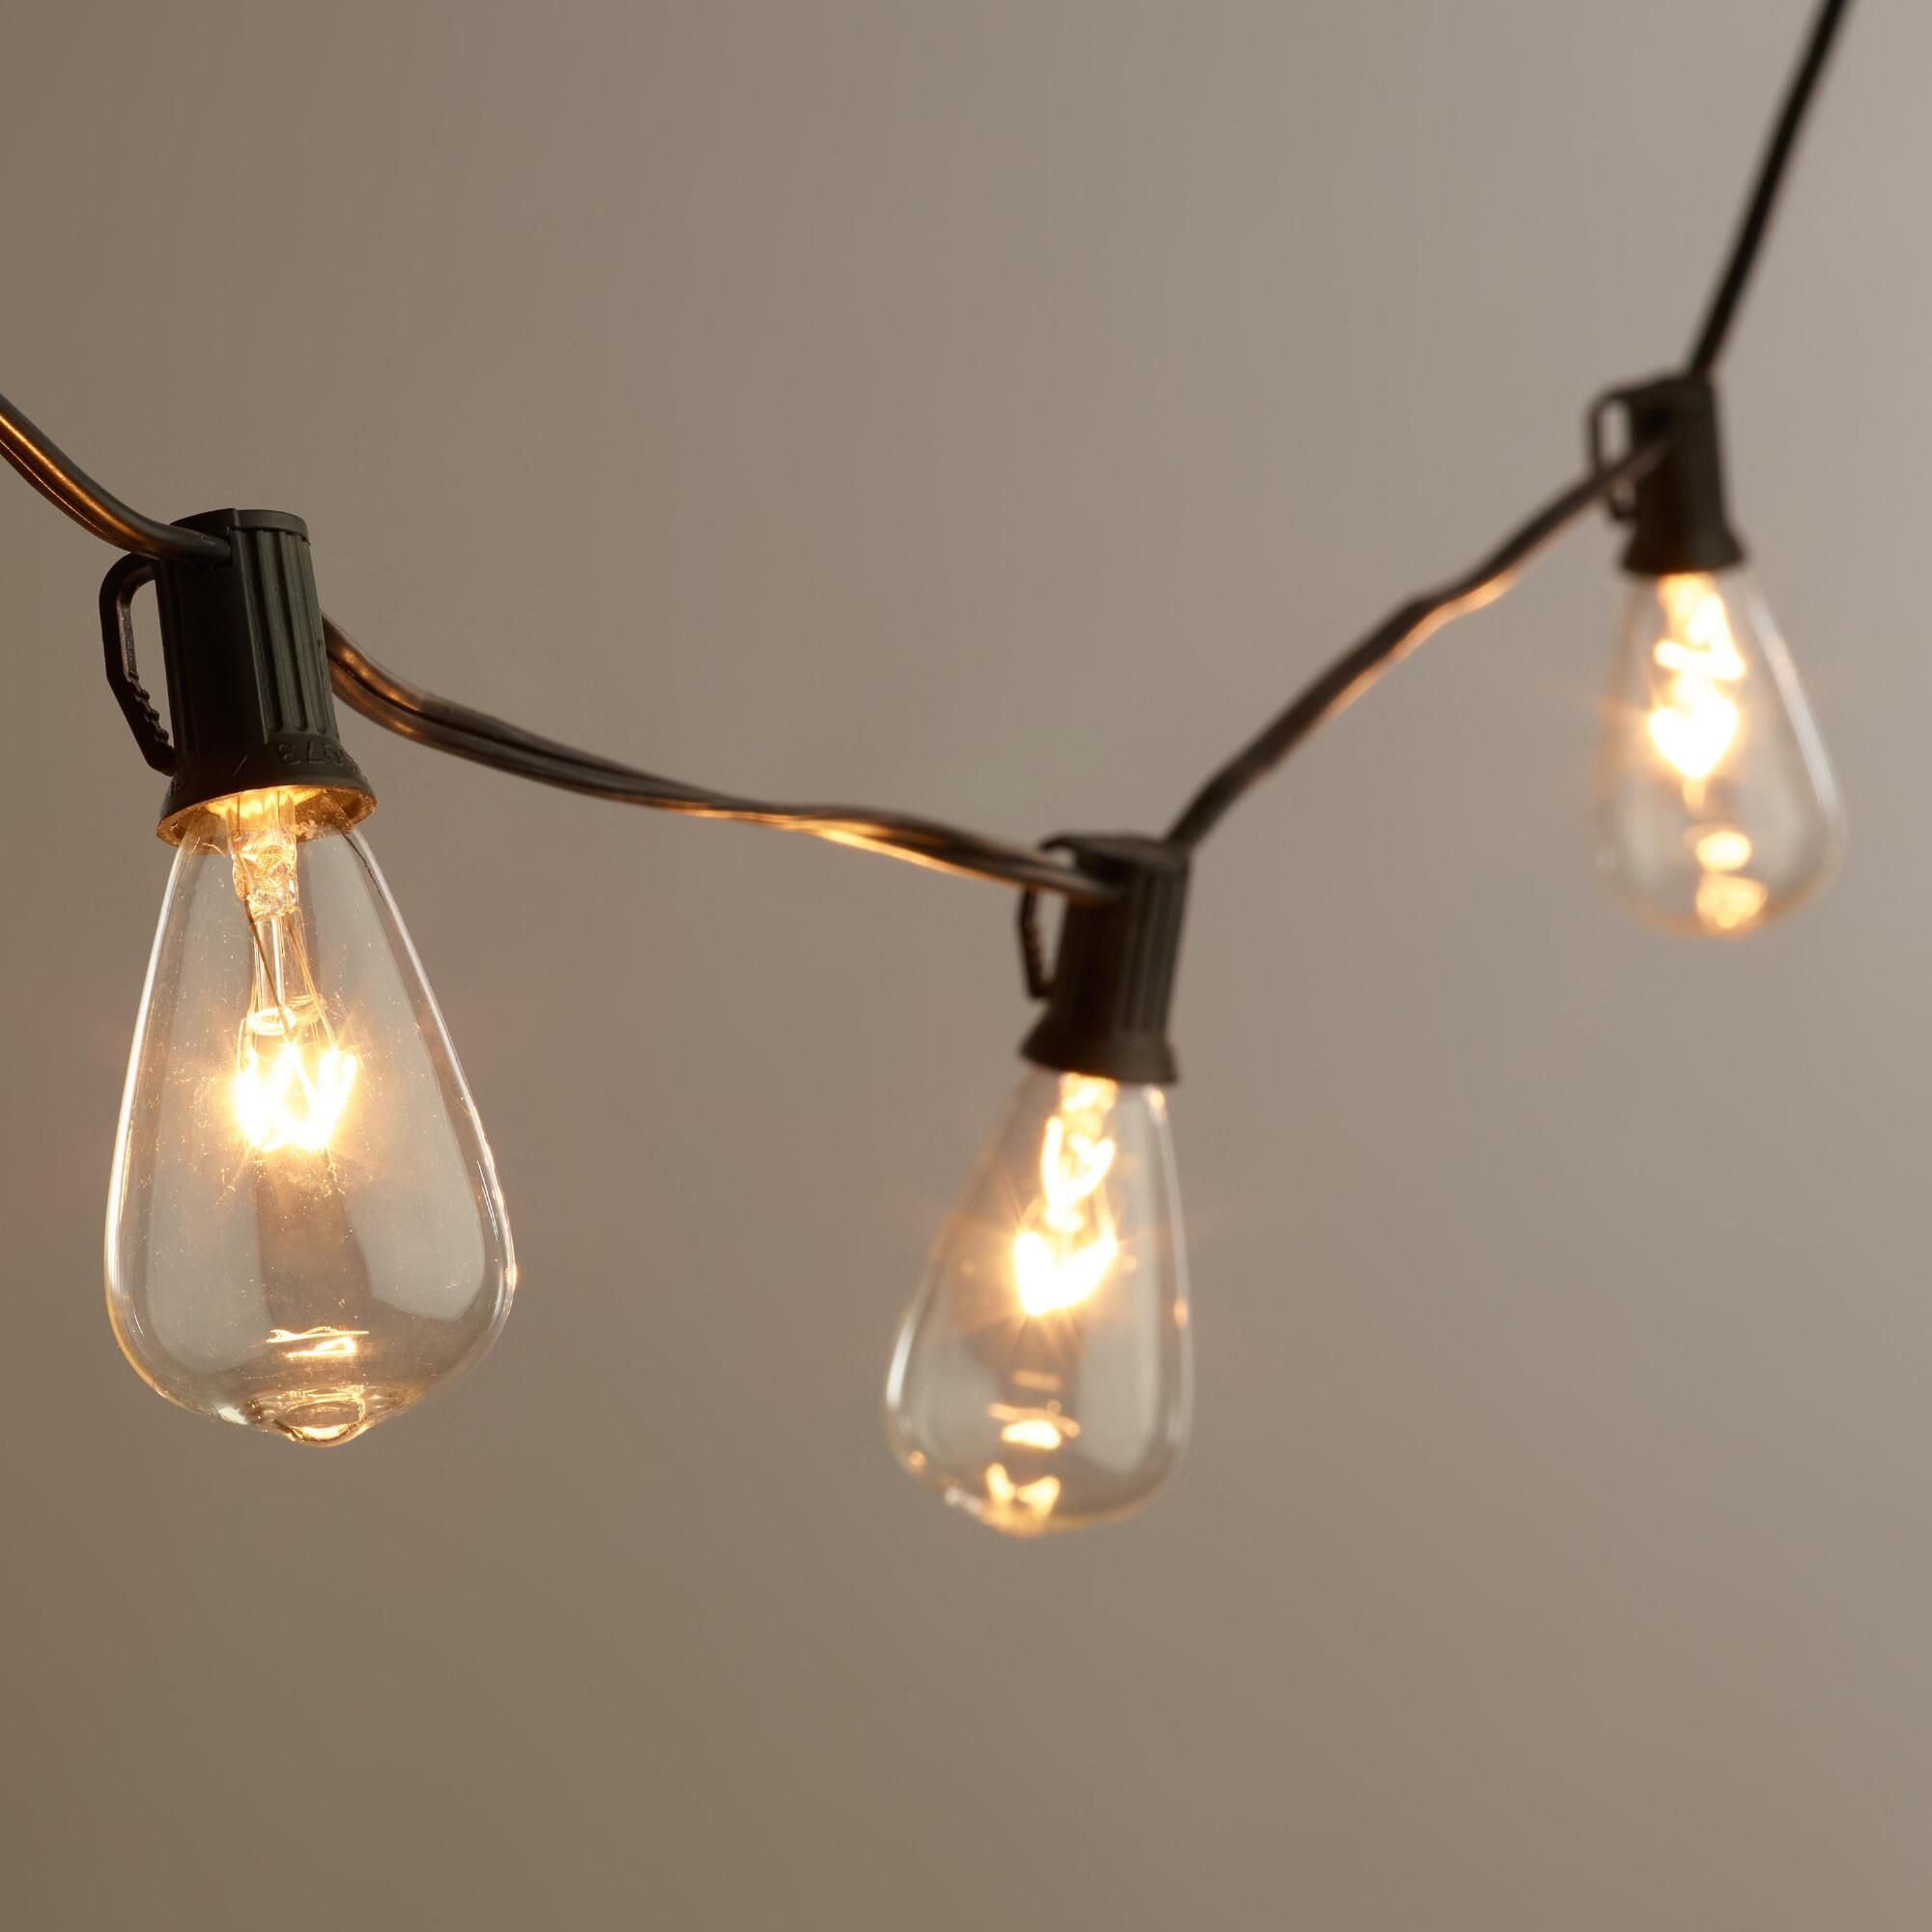 Inspired The Vintage Light Bulbs Invented Thomas Edison Our intended for size 2000 X 2000